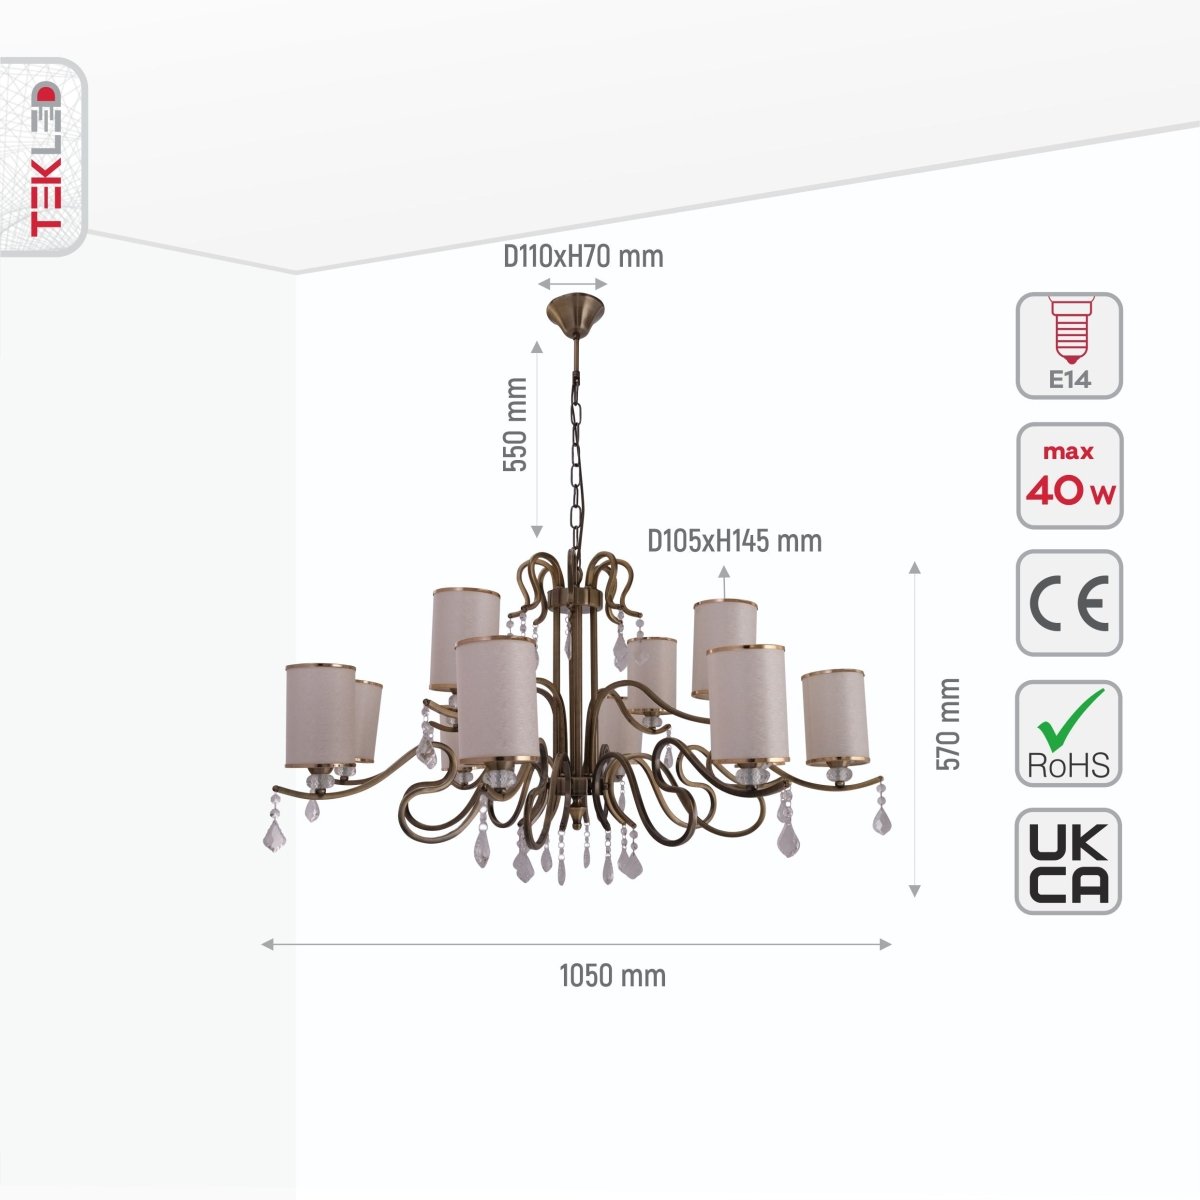 Size and specs of Cream Shade Antique Brass Metal 12 Arm Chandelier with Pendeloque Crystals 12xE14 | TEKLED 158-17830